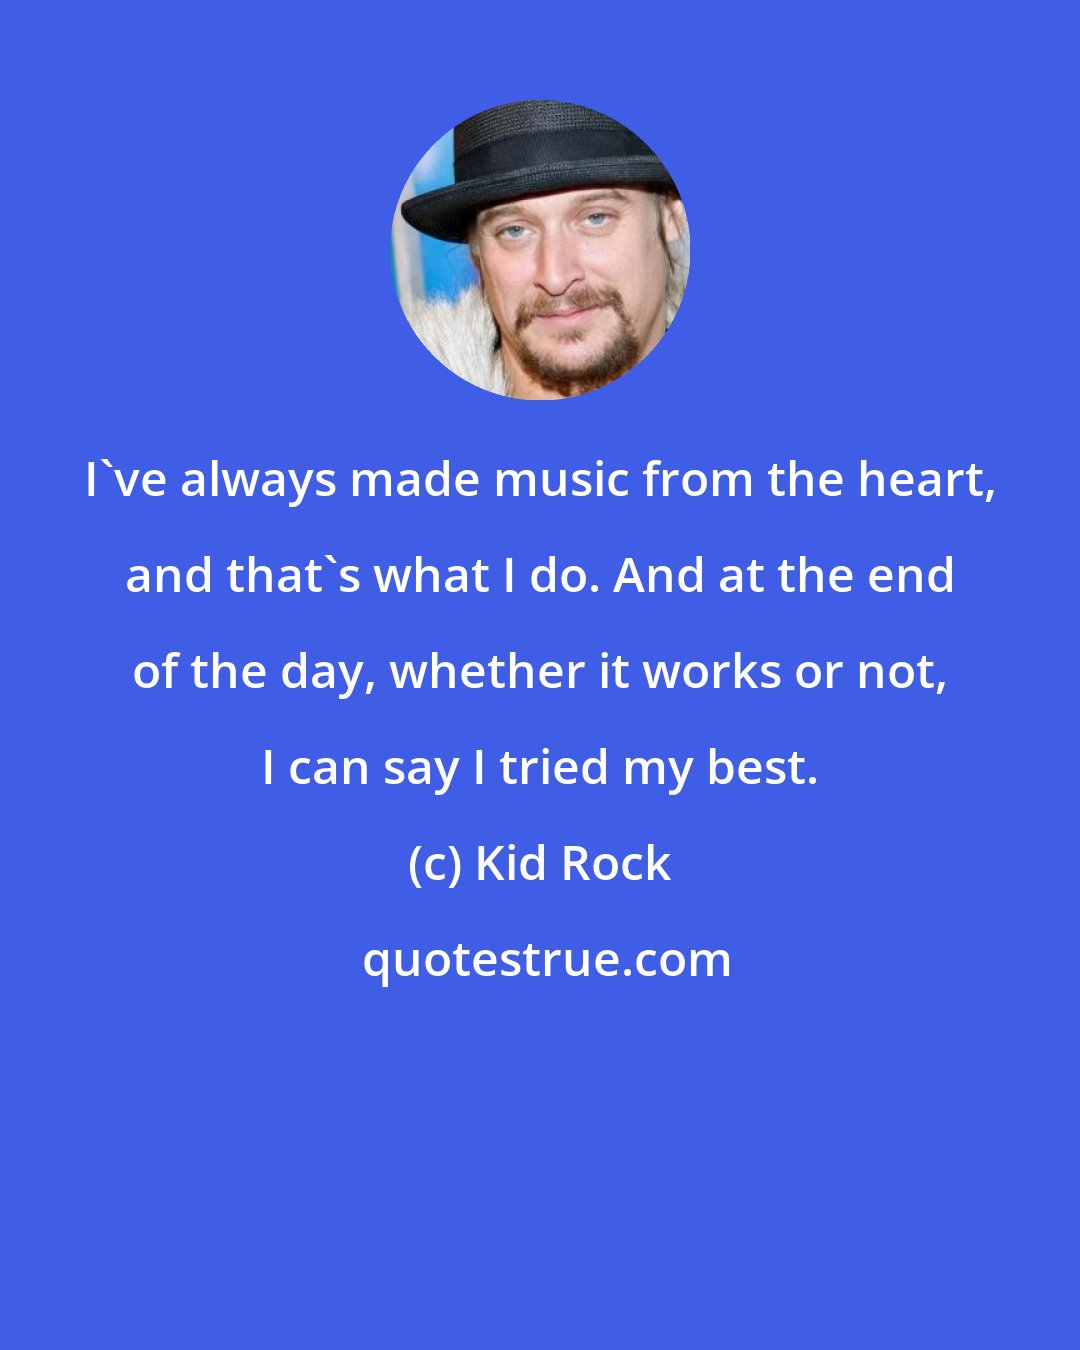 Kid Rock: I've always made music from the heart, and that's what I do. And at the end of the day, whether it works or not, I can say I tried my best.